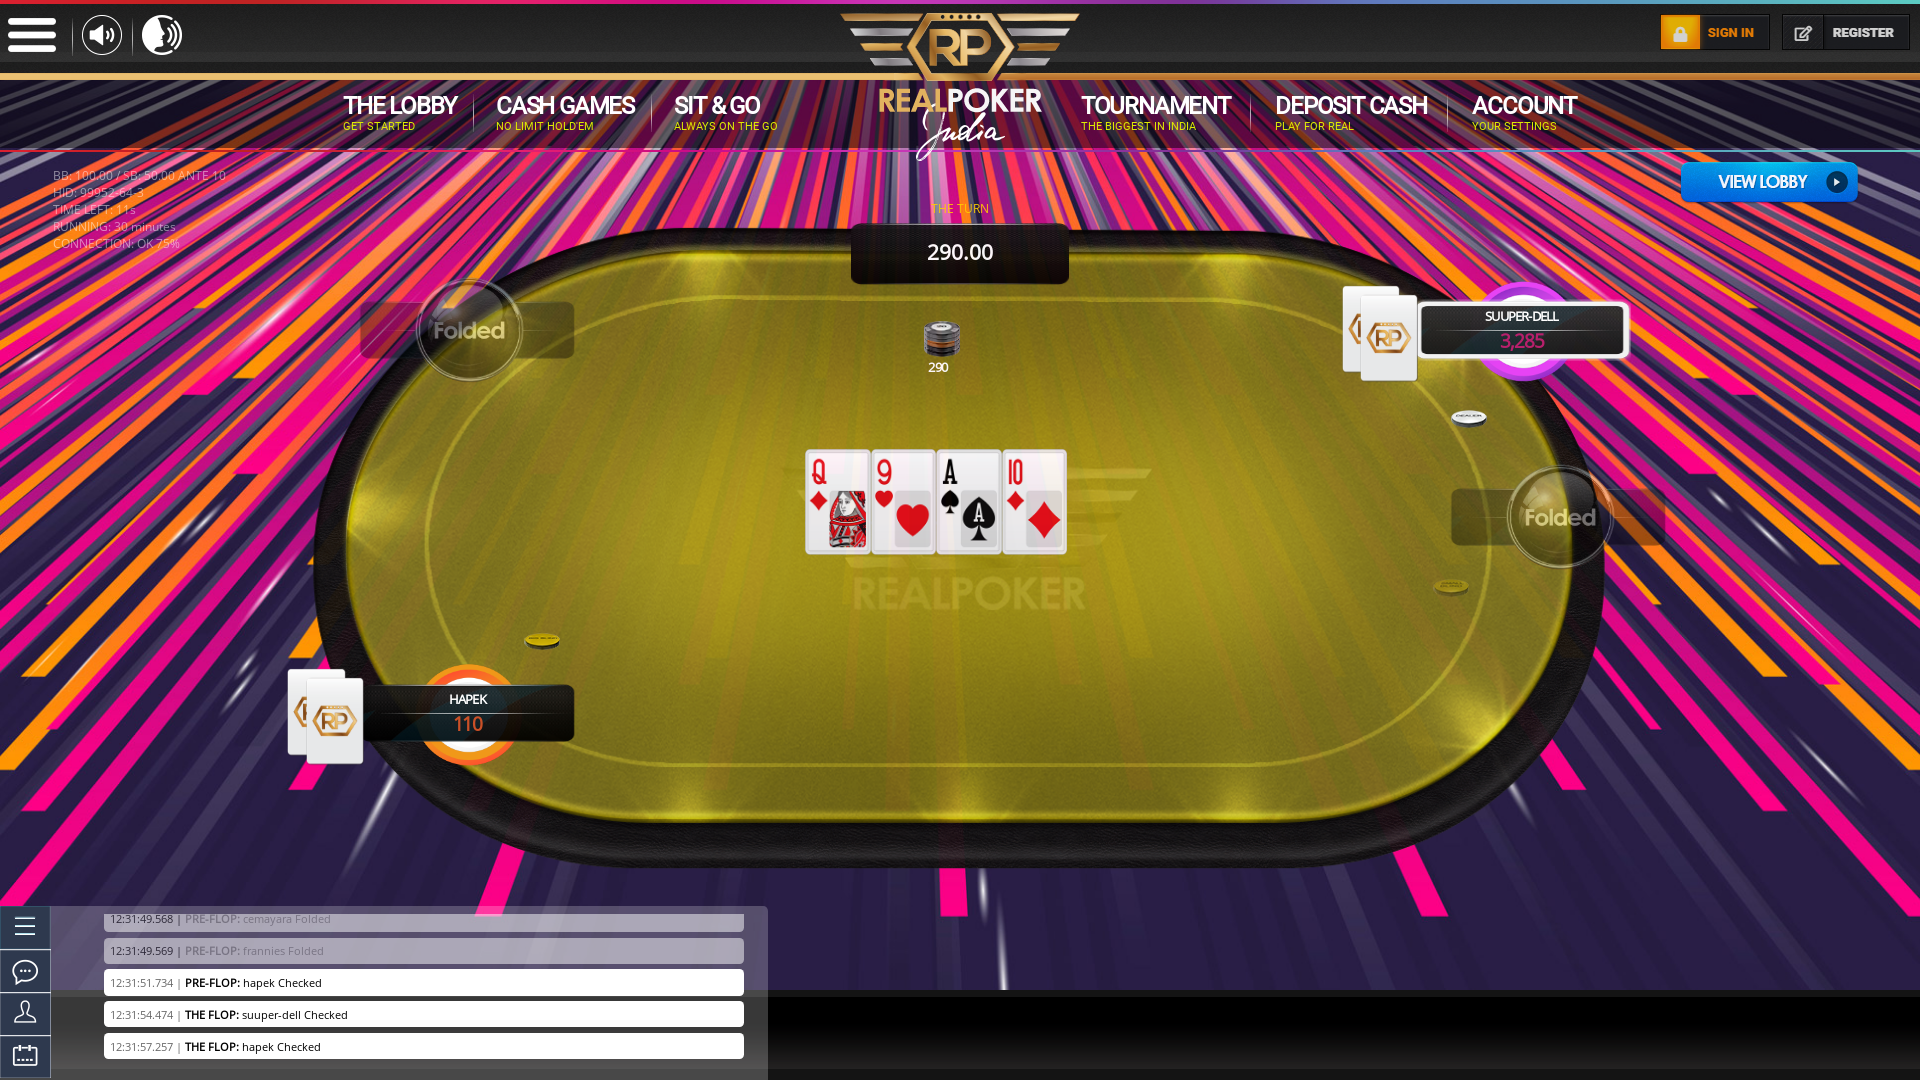 Bangalore online poker game on a 10 player table in the 30th minute of the match